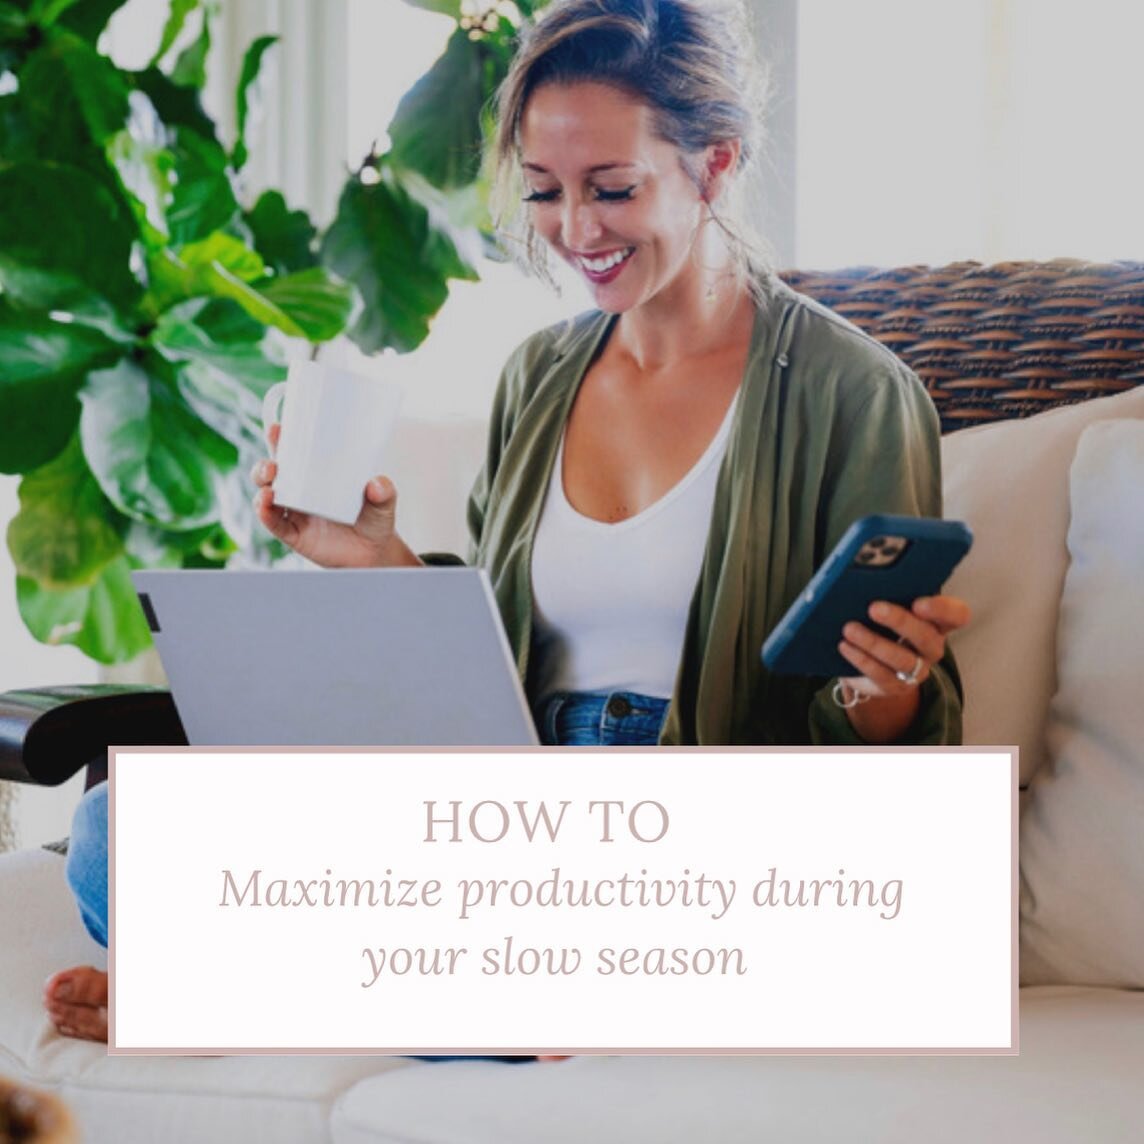 8 ways how you can maximize your slow season

And it starts with embracing the calm: giving yourself time to reset your mind, body and heart. 

But don't worry there is a hefty list of things you can do to make sure you are growing your business and 